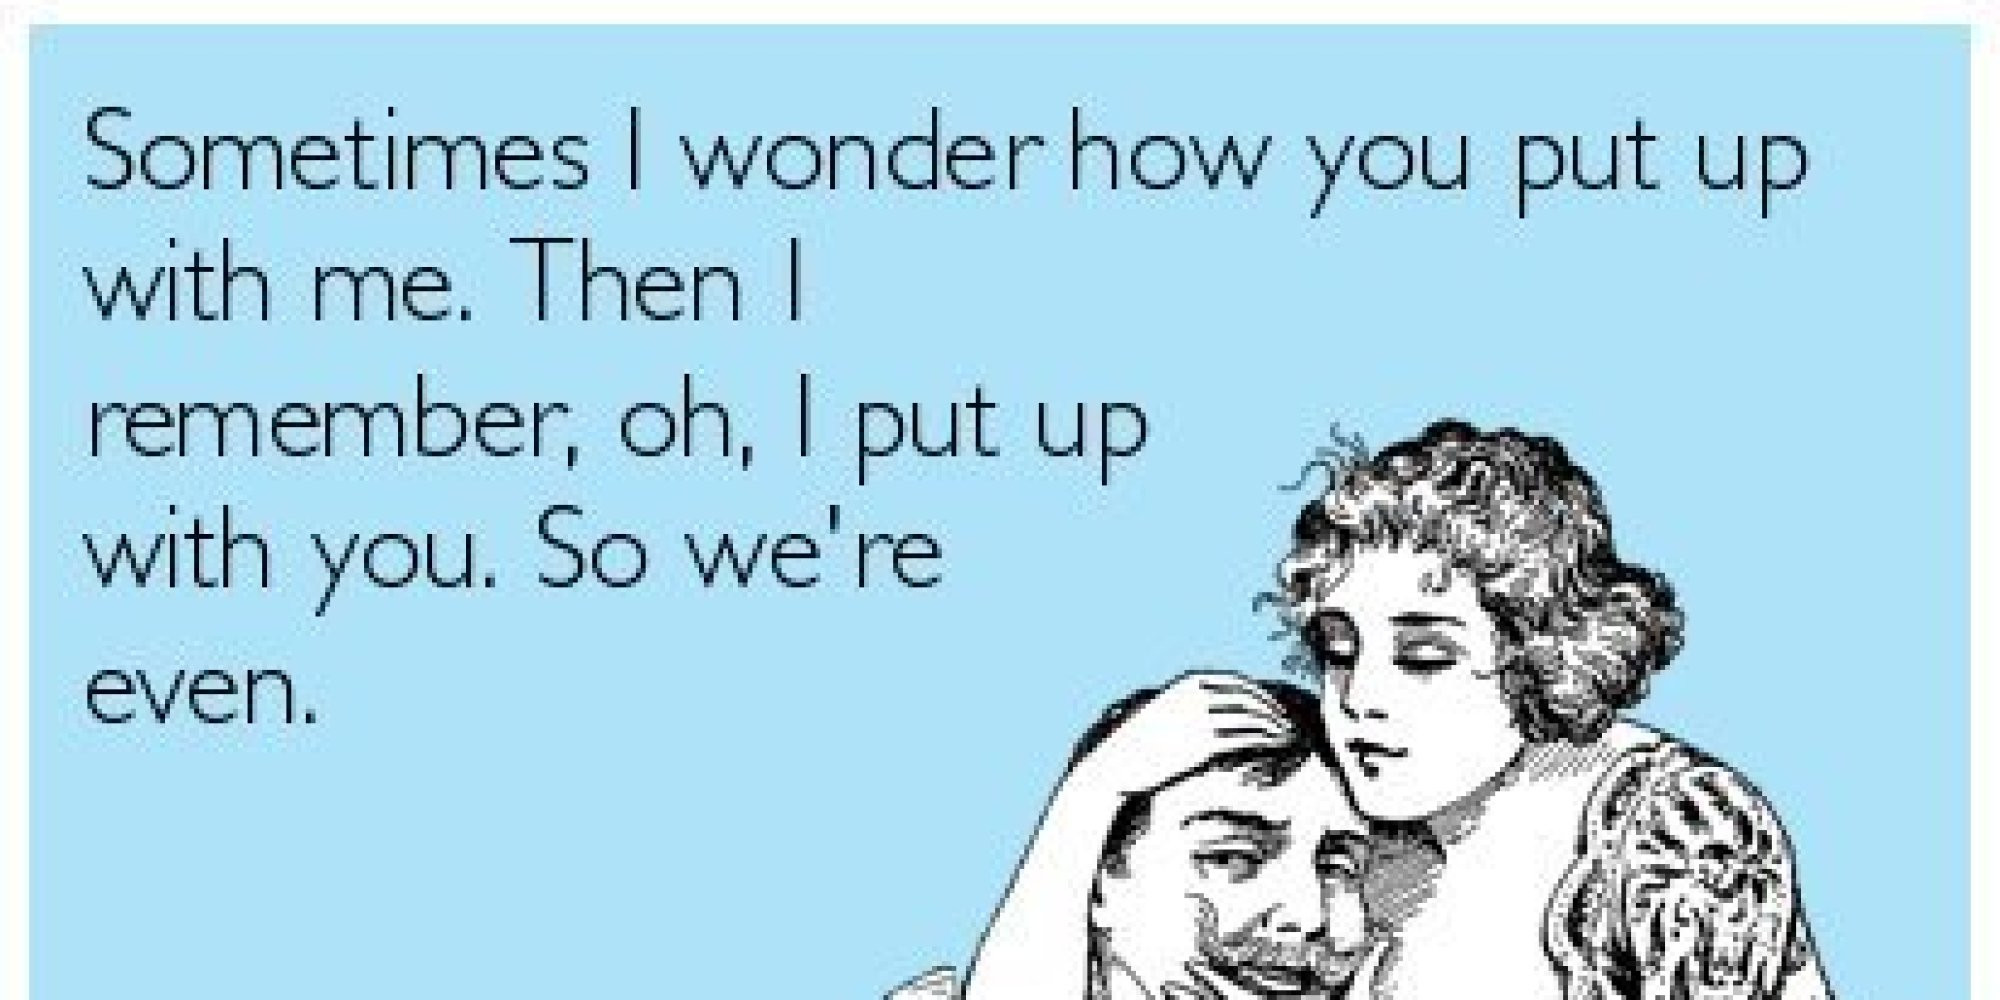 Funny Quotes For Couples
 15 Brutally Honest Cards For Couples With A Sense Humor